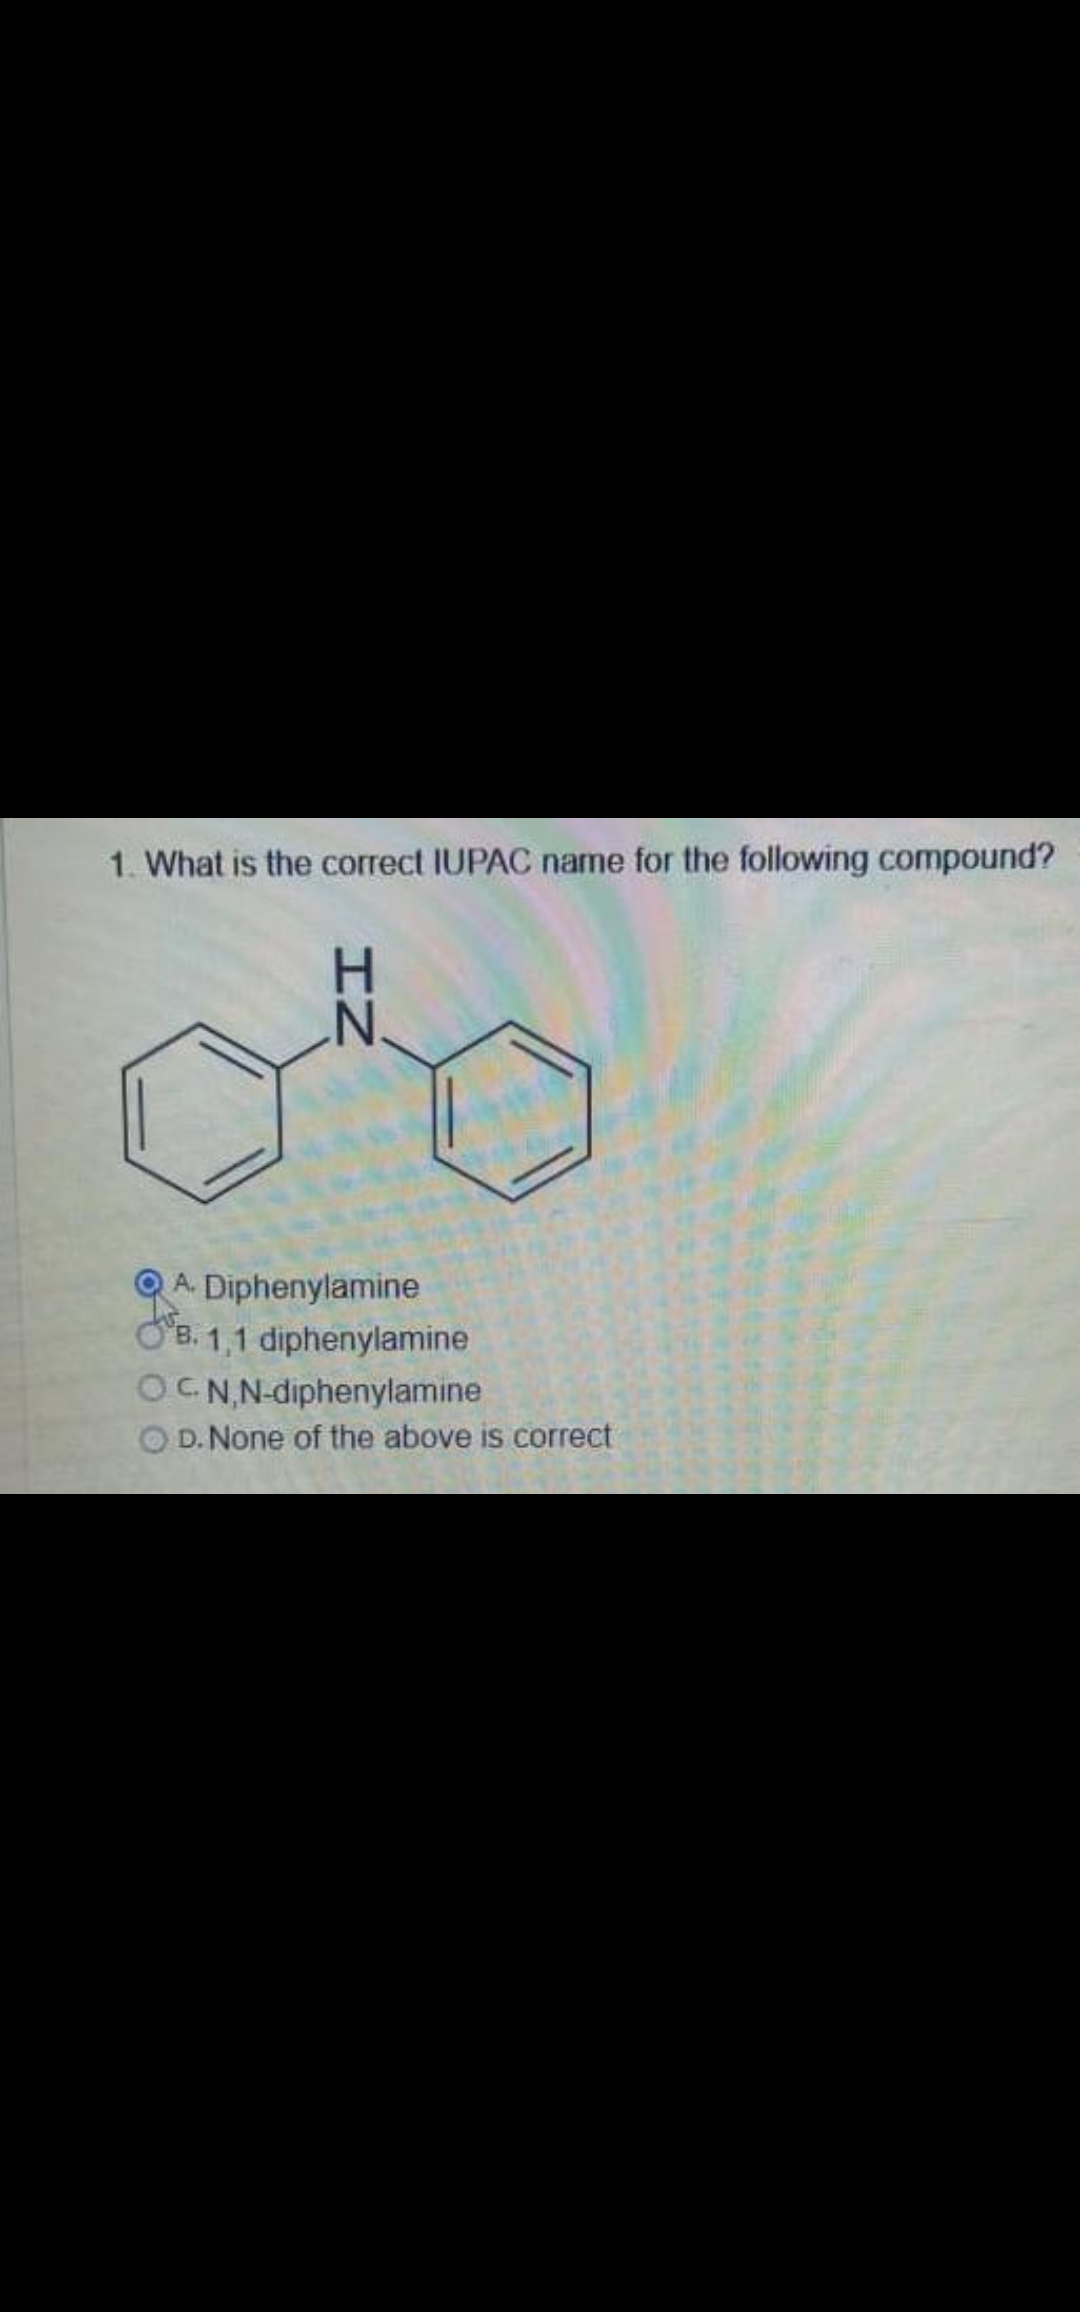 1. What is the correct IUPAC name for the following compound?
H.
N.
QA Diphenylamine
O'B. 1,1 diphenylamine
OCN,N-diphenylamine
O D. None of the above is correct
